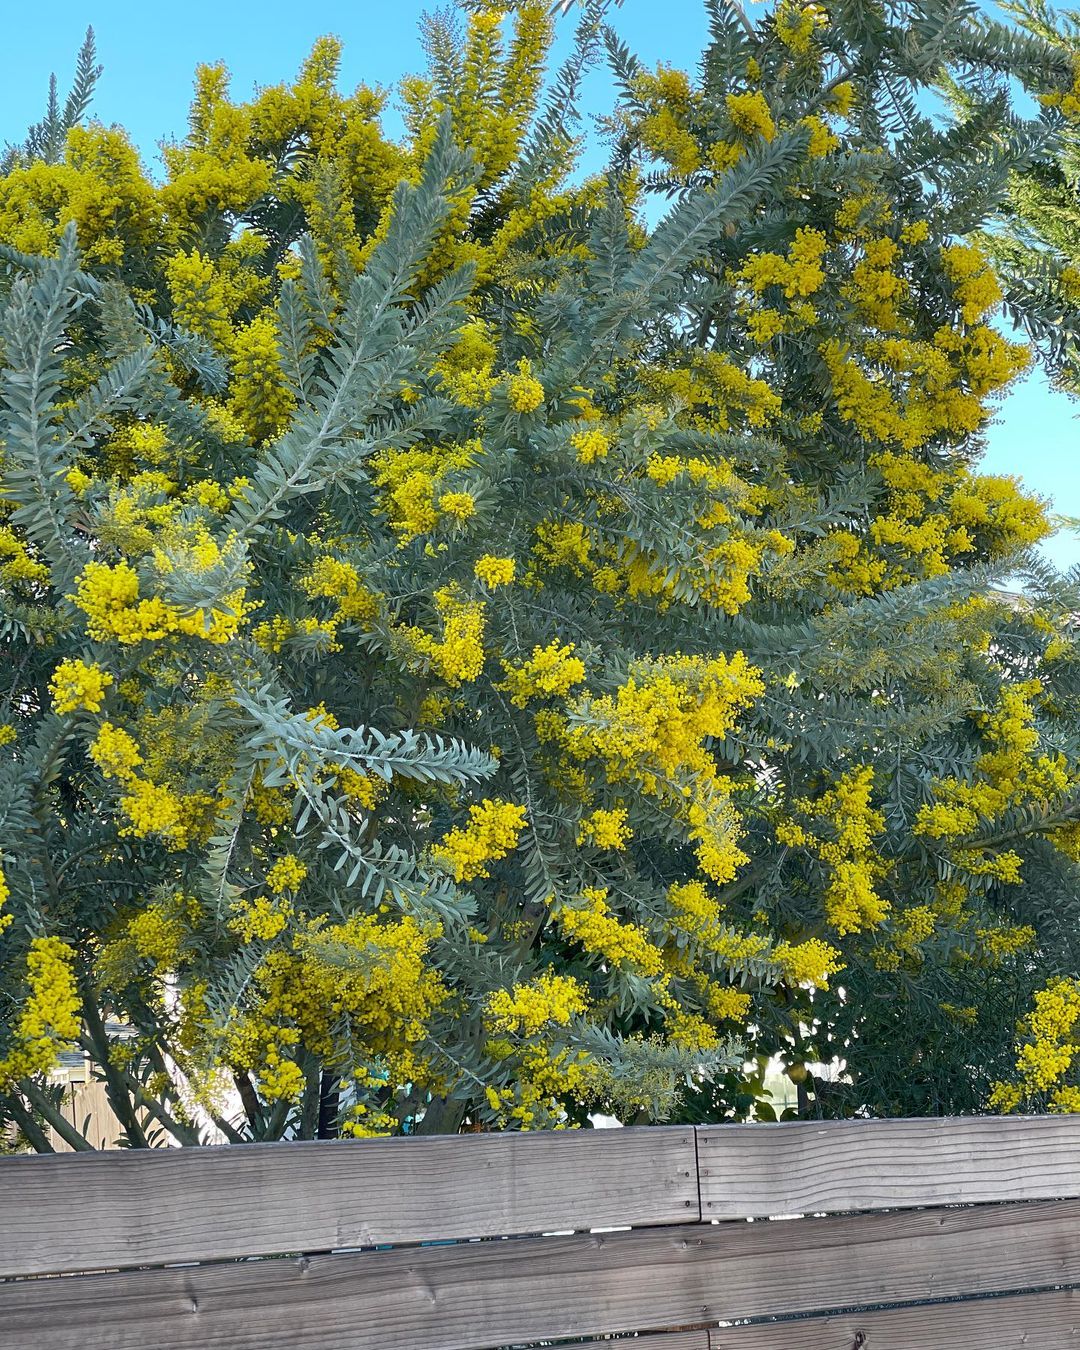 Acacia tree adorned with bright yellow flowers and leaves.